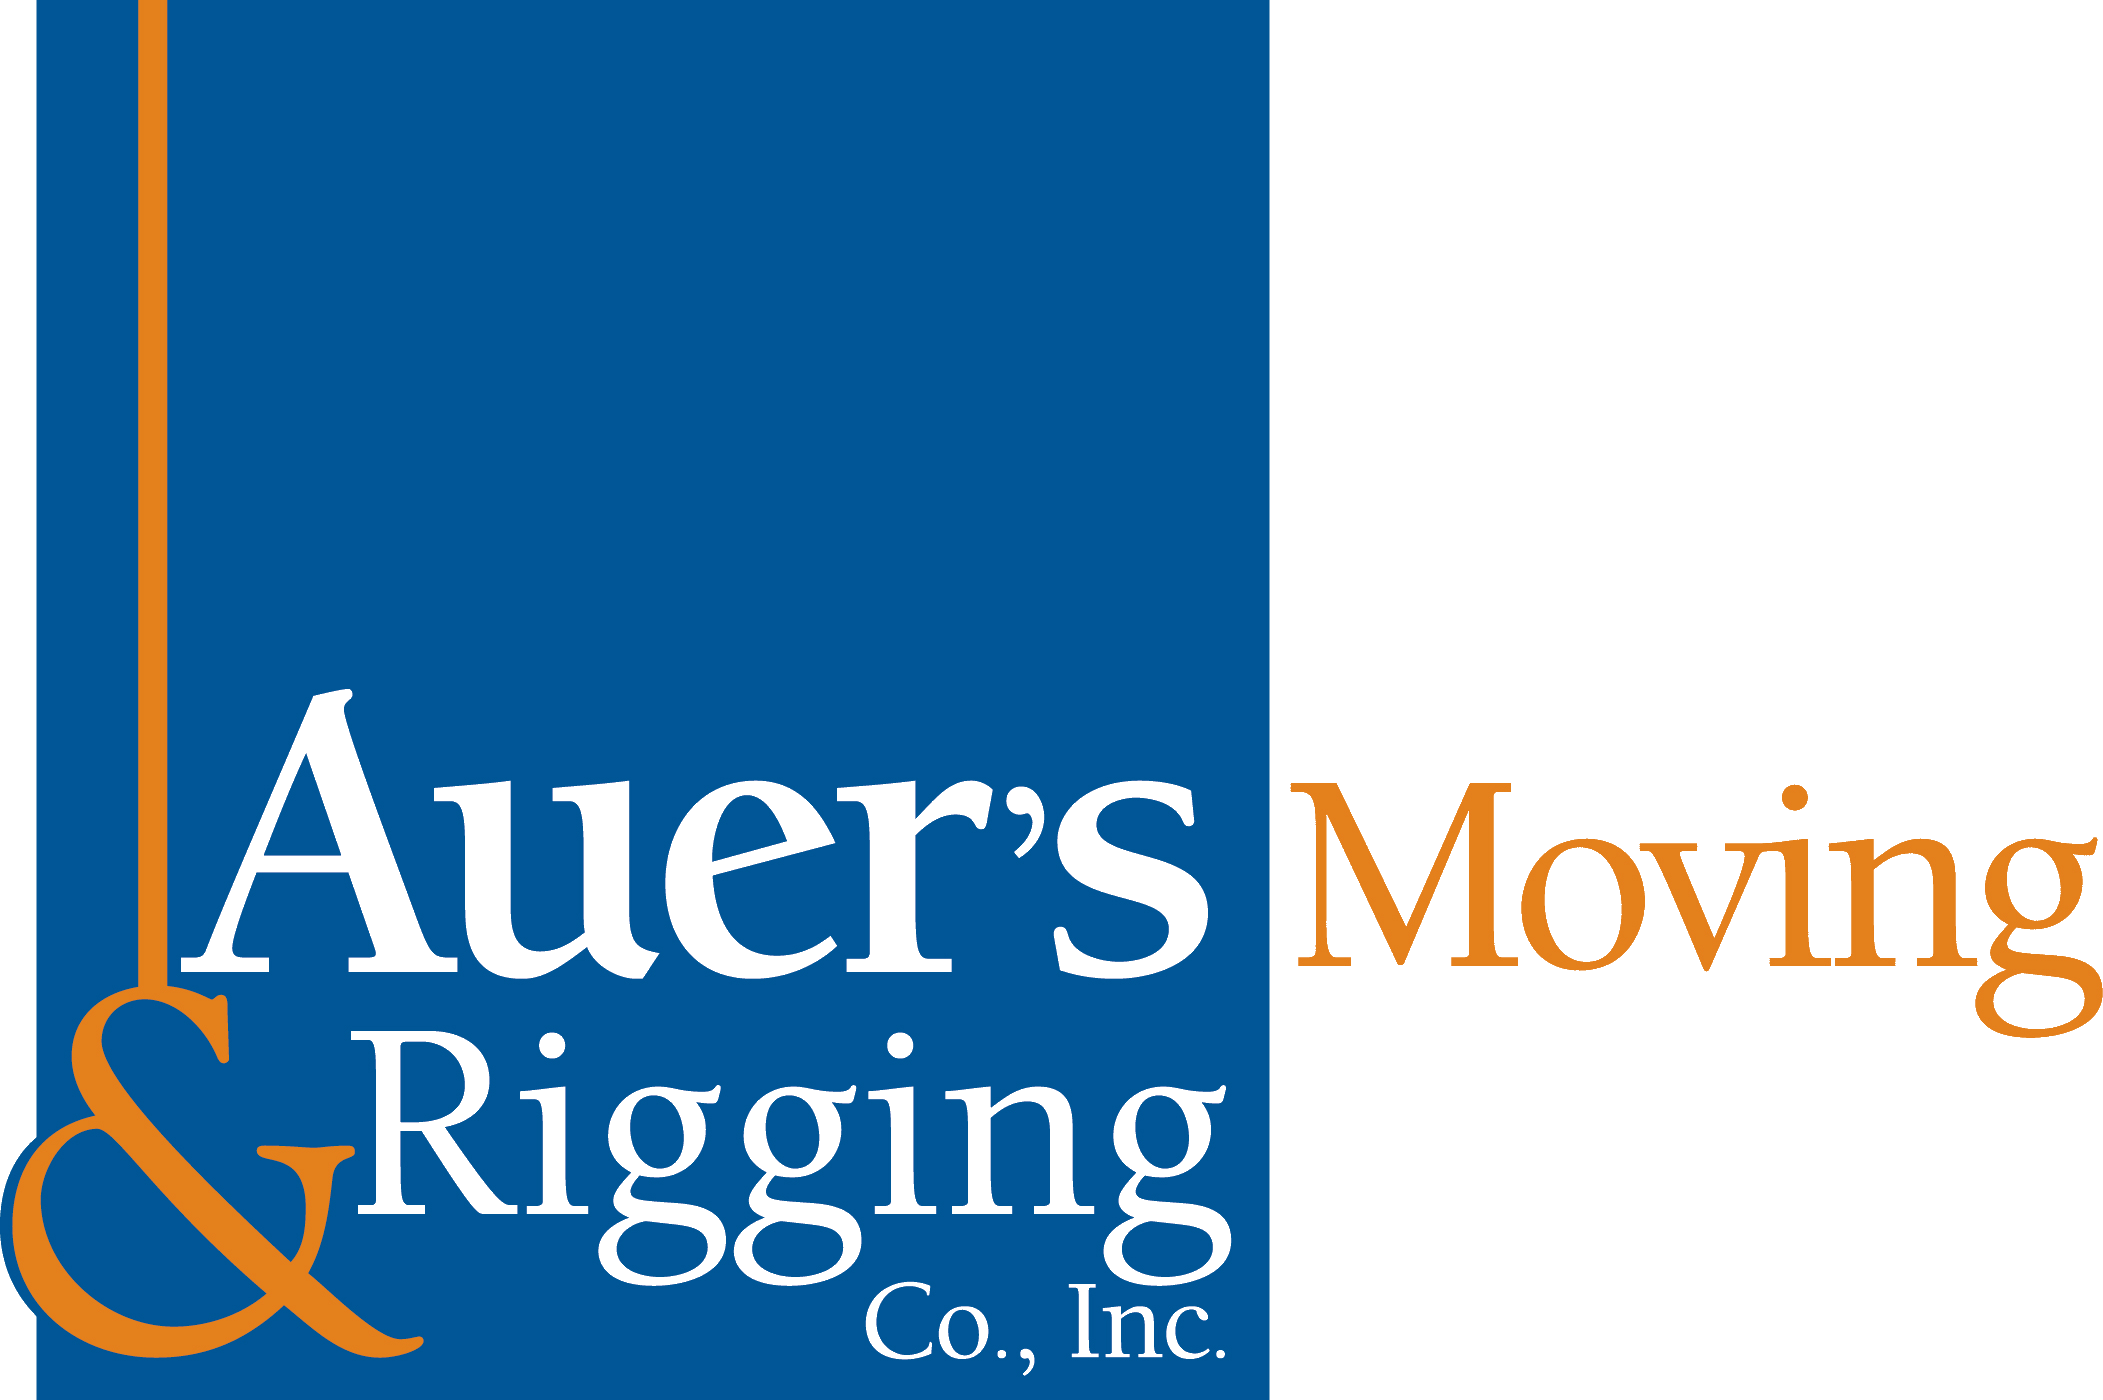 Auer’s Moving & Rigging